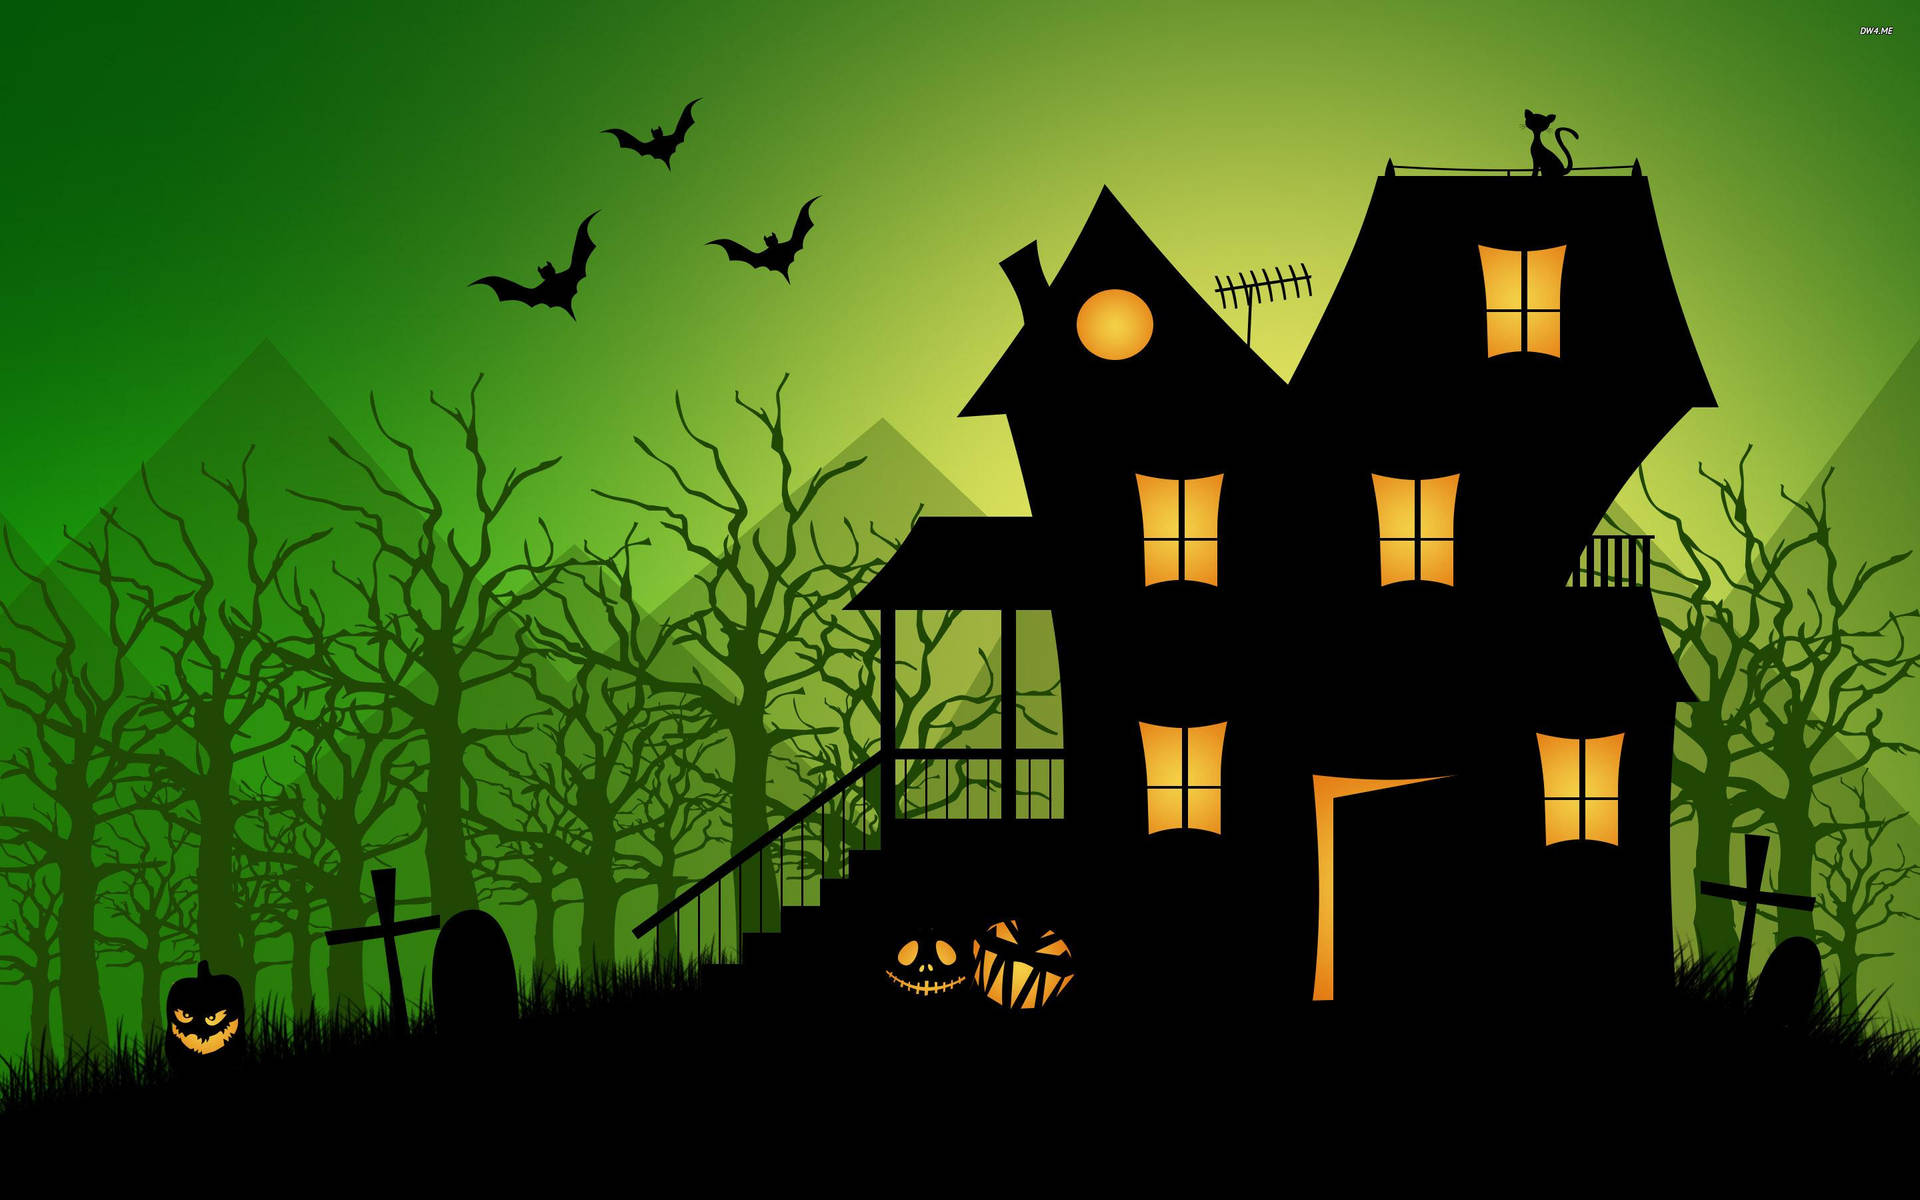 Trick or treaters beware - the house on the hill is a scary adventure! Wallpaper